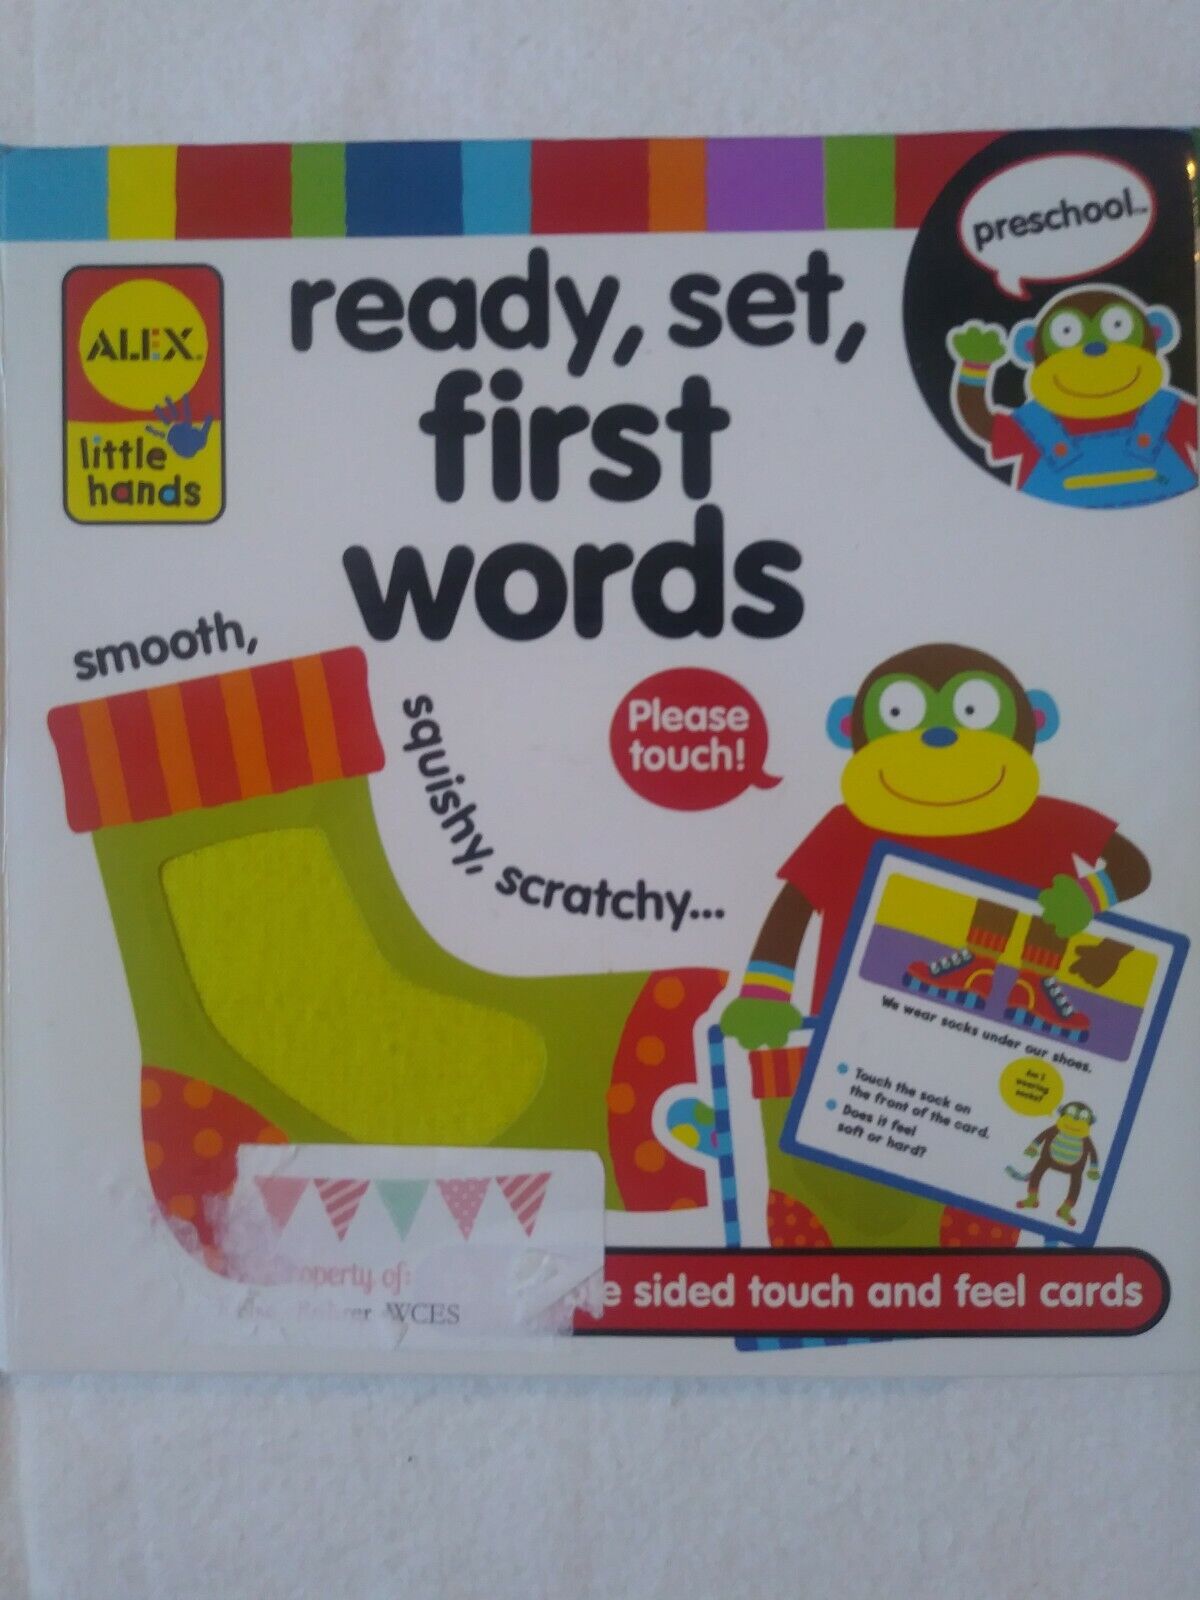 Alex Little Hands Ready Set Sale item First Flashca Words Latest item Touch And Feel